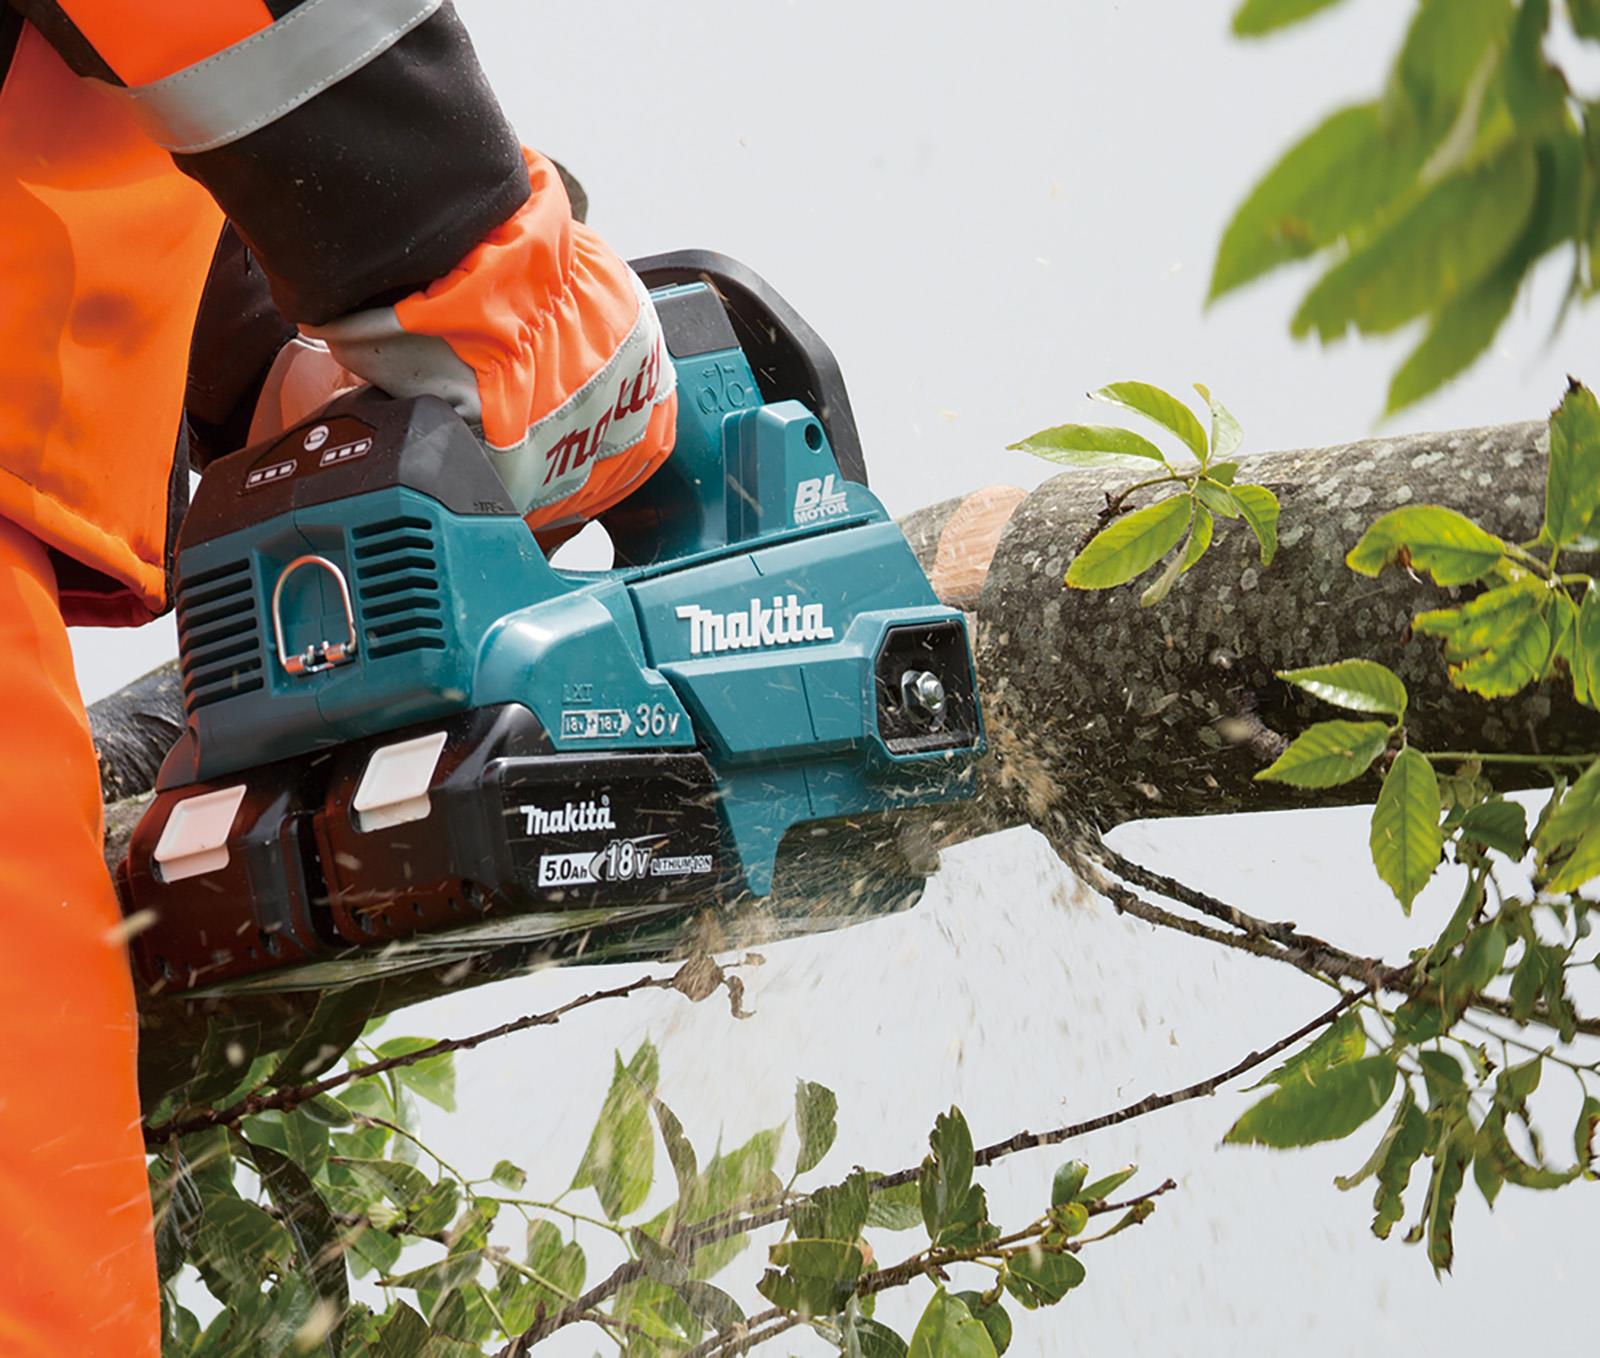 Makita Chainsaw Kit 30cm 12" 18V x 2 LXT Brushless Cordless 2 x 6Ah Battery and Dual Rapid Charger Top Handle Garden Tree Cutting Pruning DUC306PG2